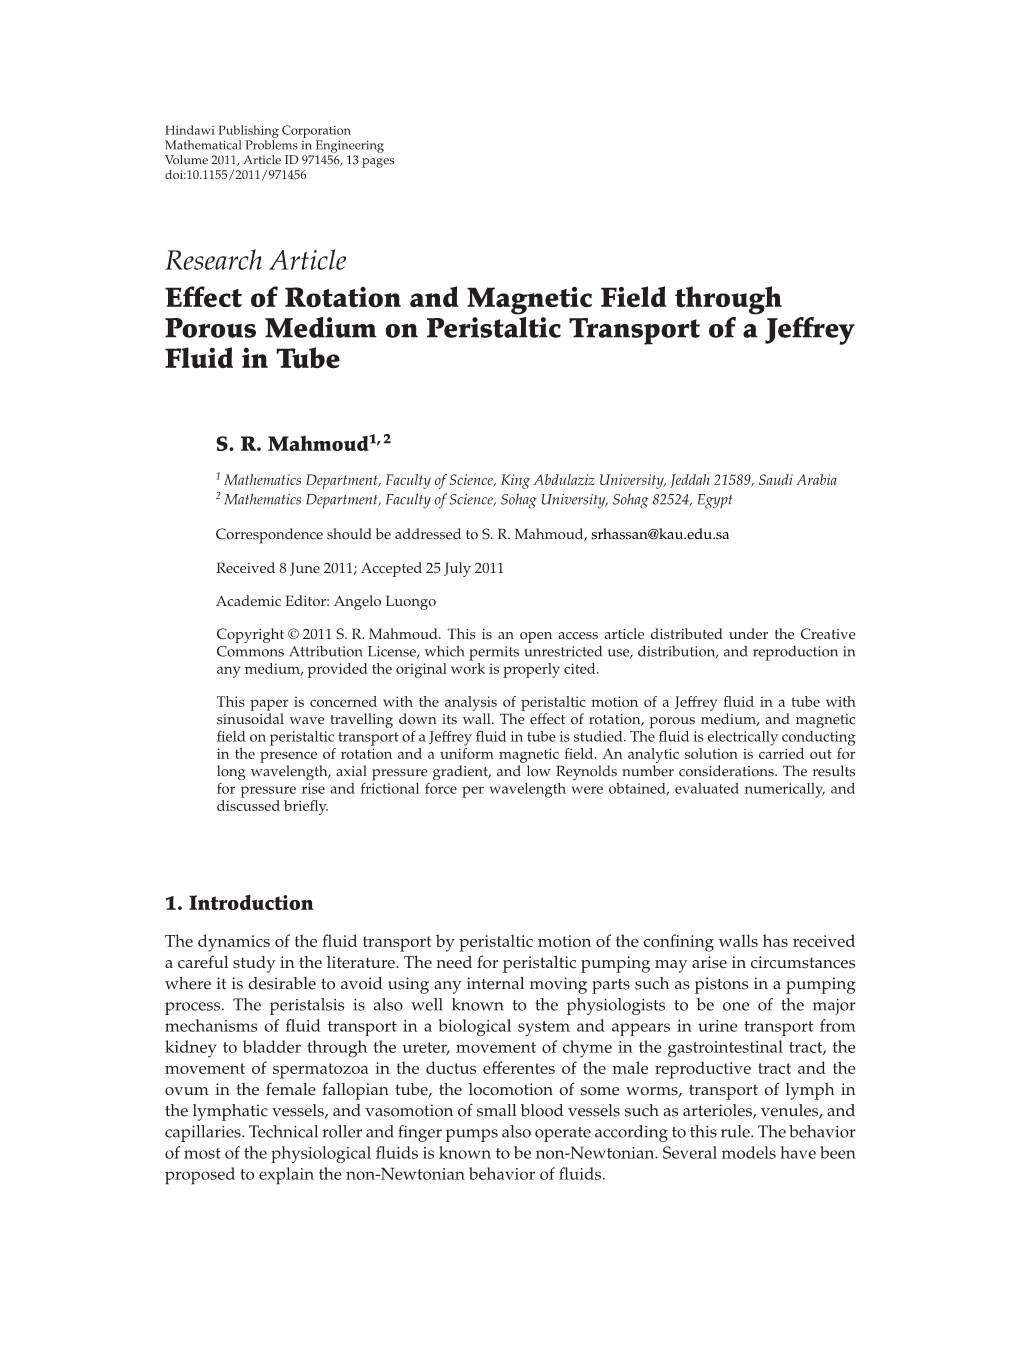 Research Article Effect of Rotation and Magnetic Field Through Porous Medium on Peristaltic Transport of a Jeffrey Fluid in Tube